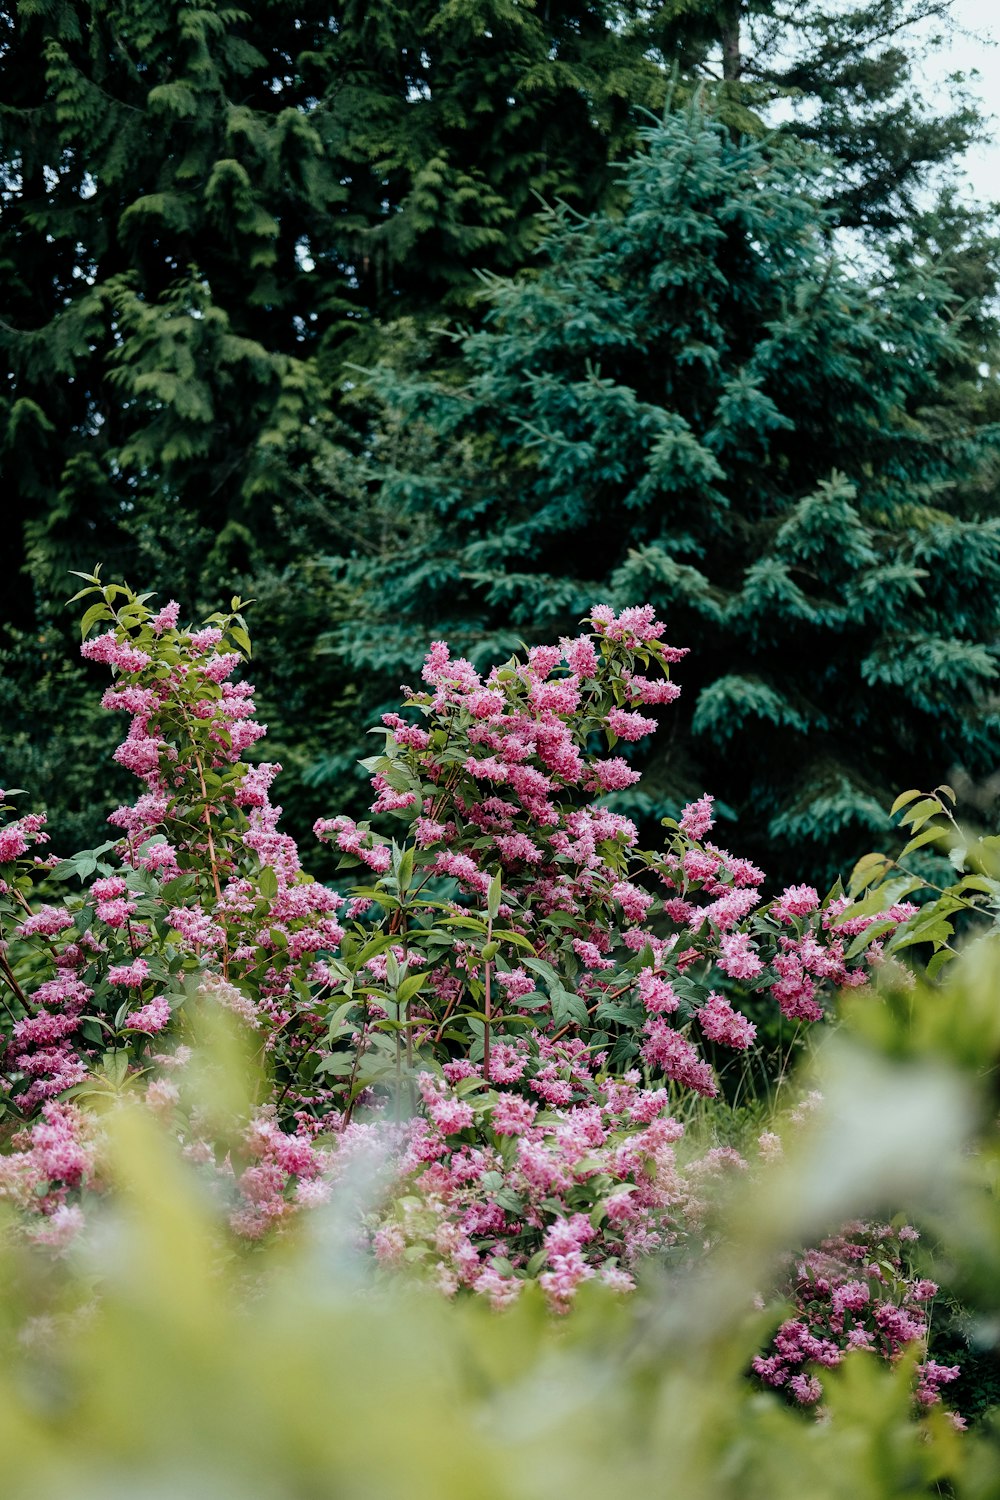 pink flowers in a garden with trees in the background